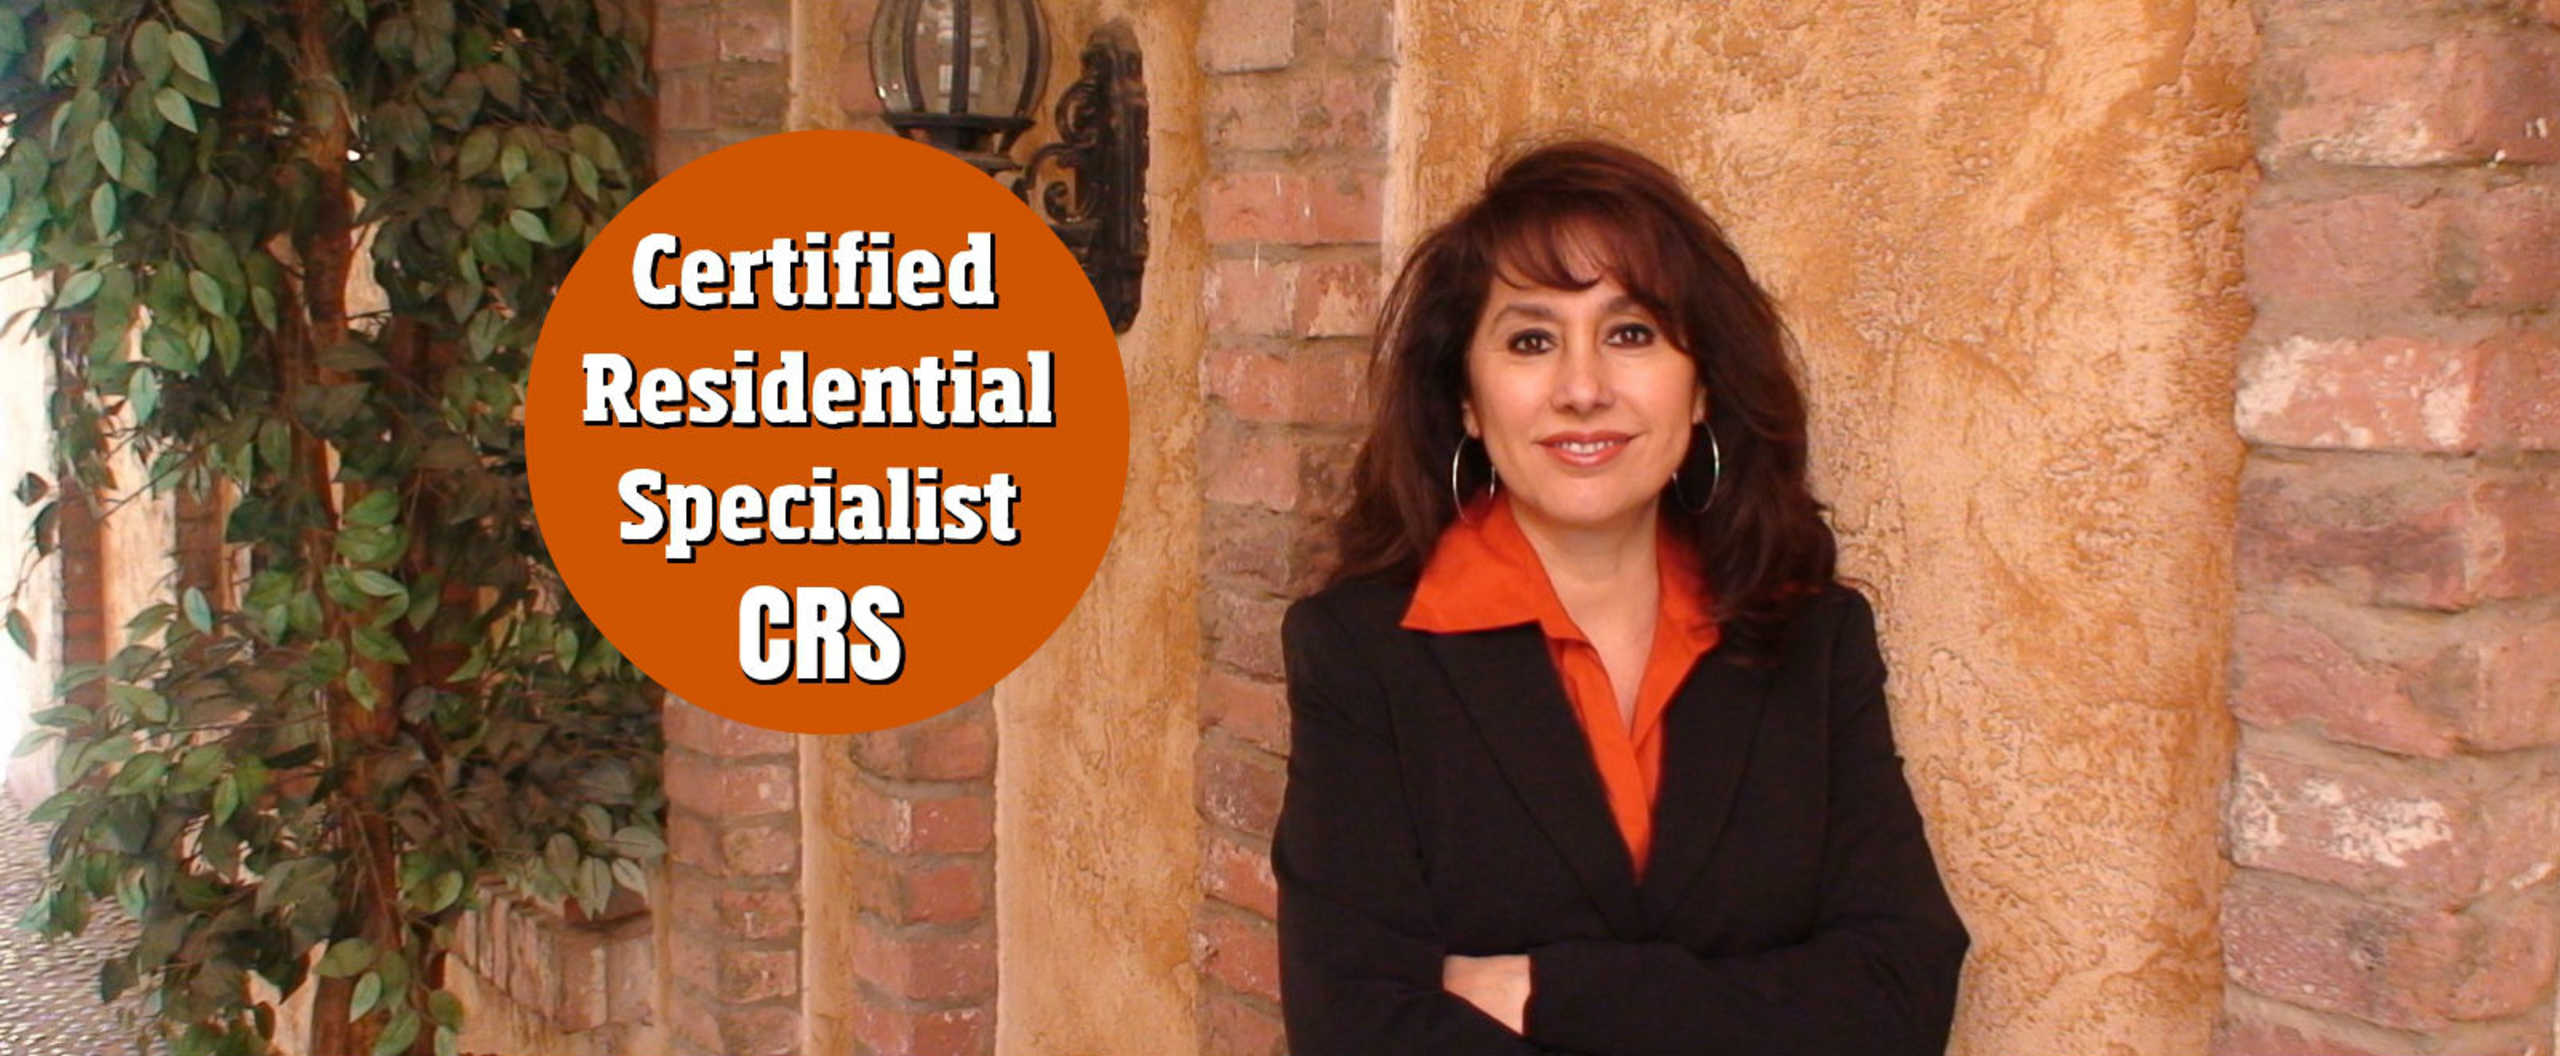 Only 3% of Realtors have earned this National Recognition. Choose the best ... hire a CRS!